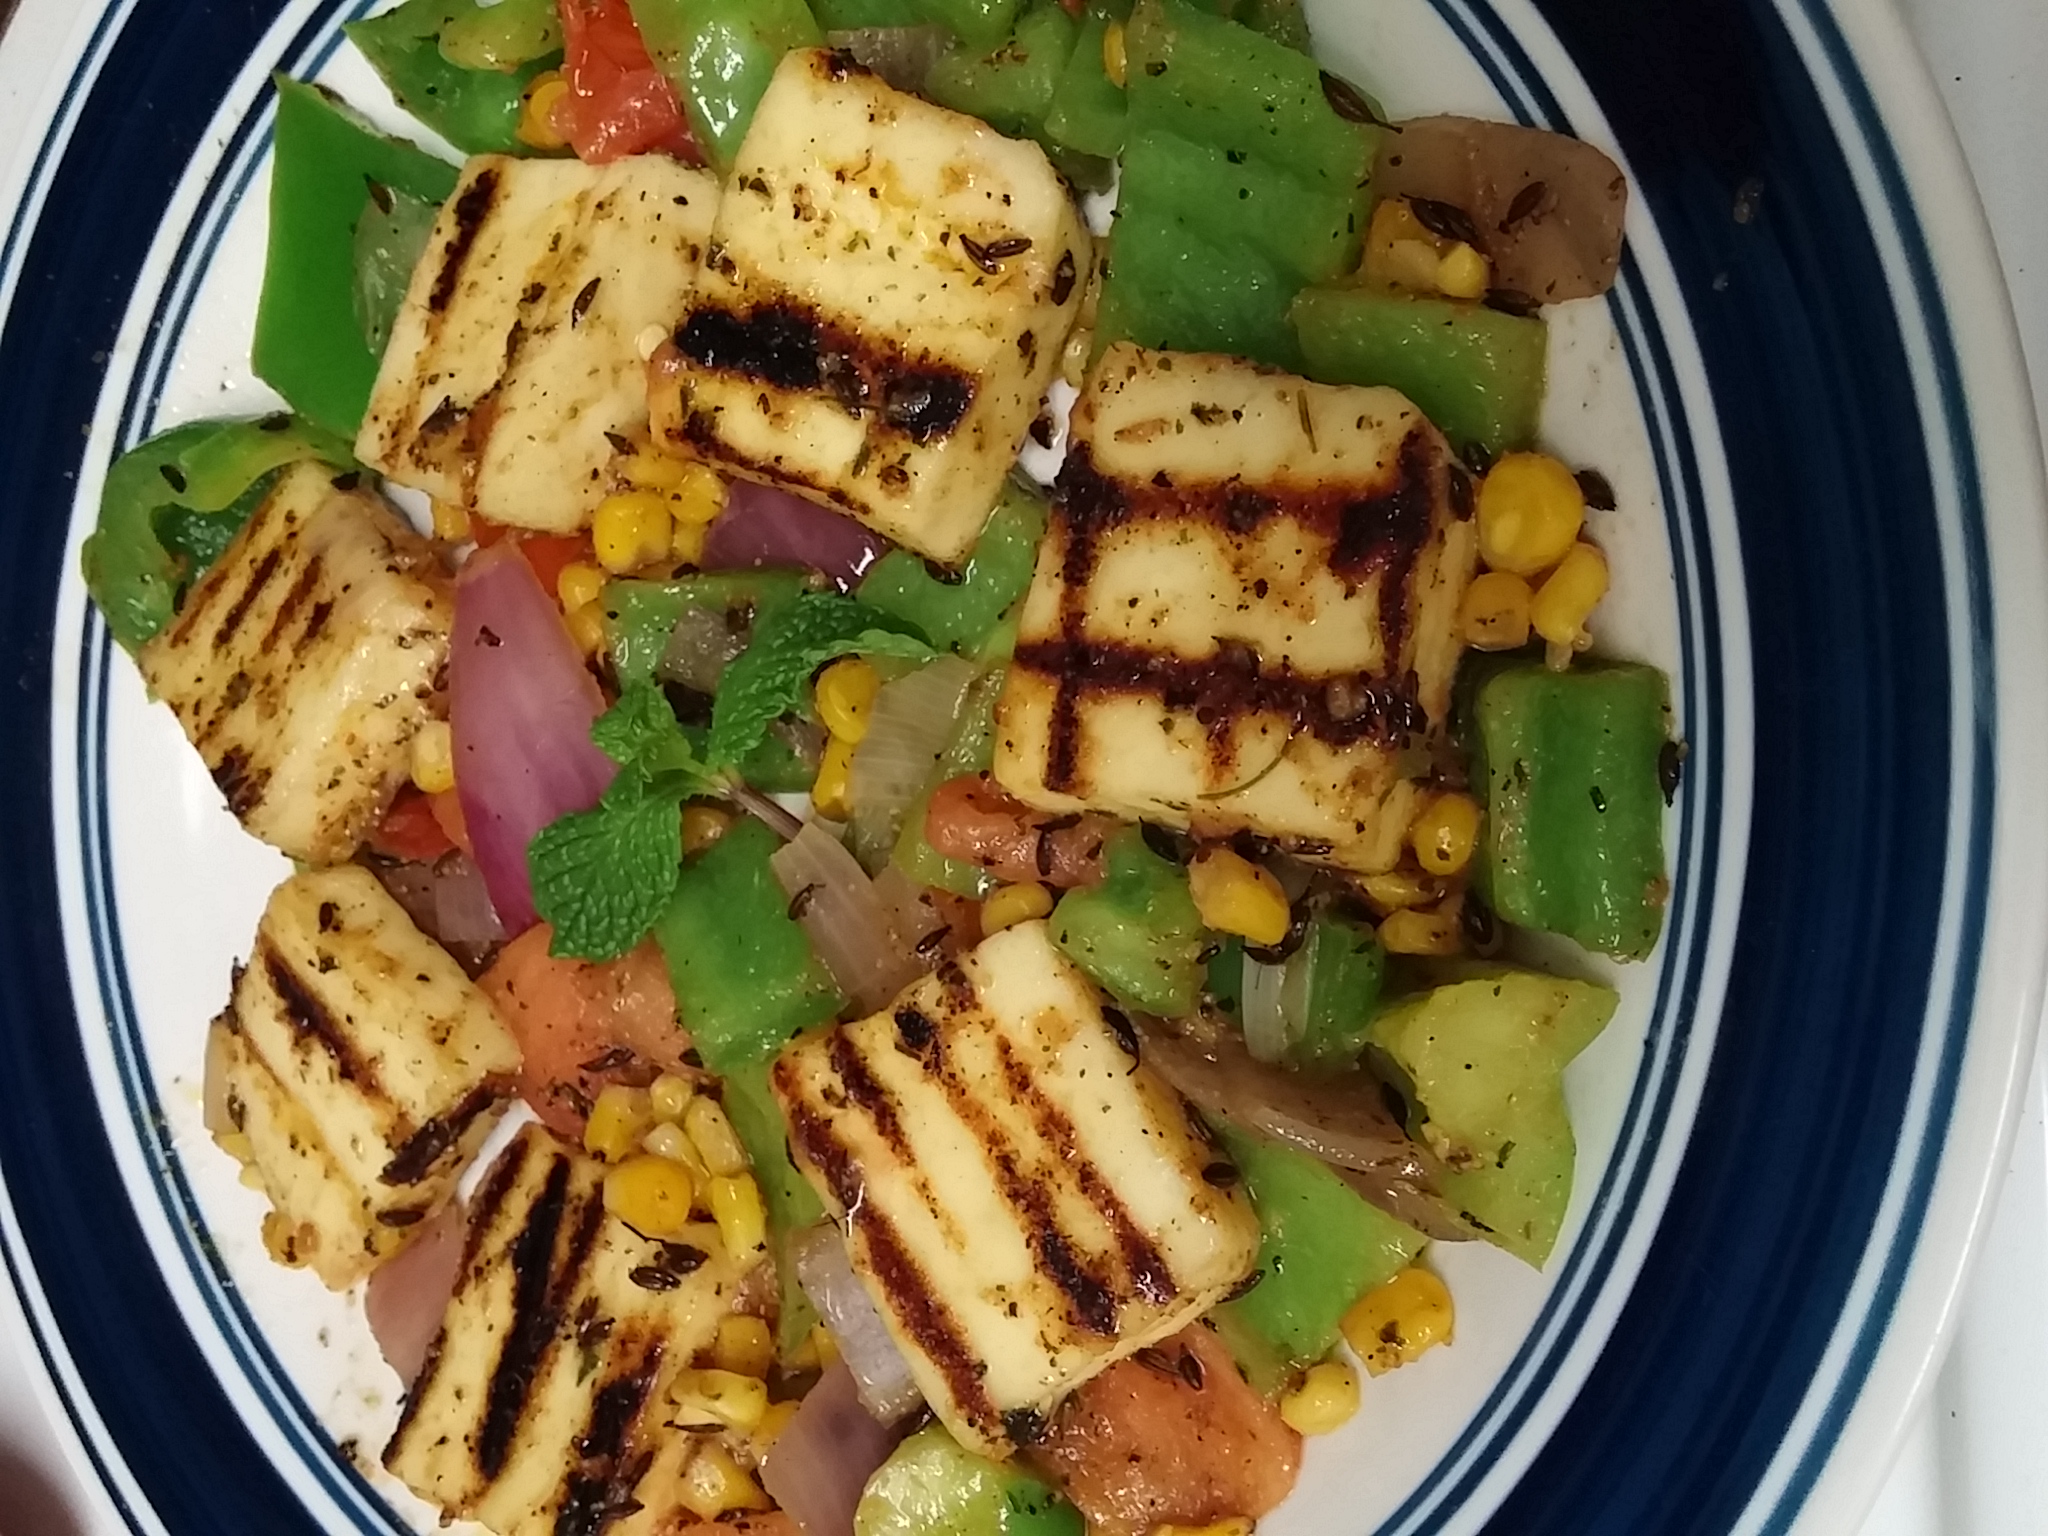 Grilled Paneer with sauteed & Crunchy veggies